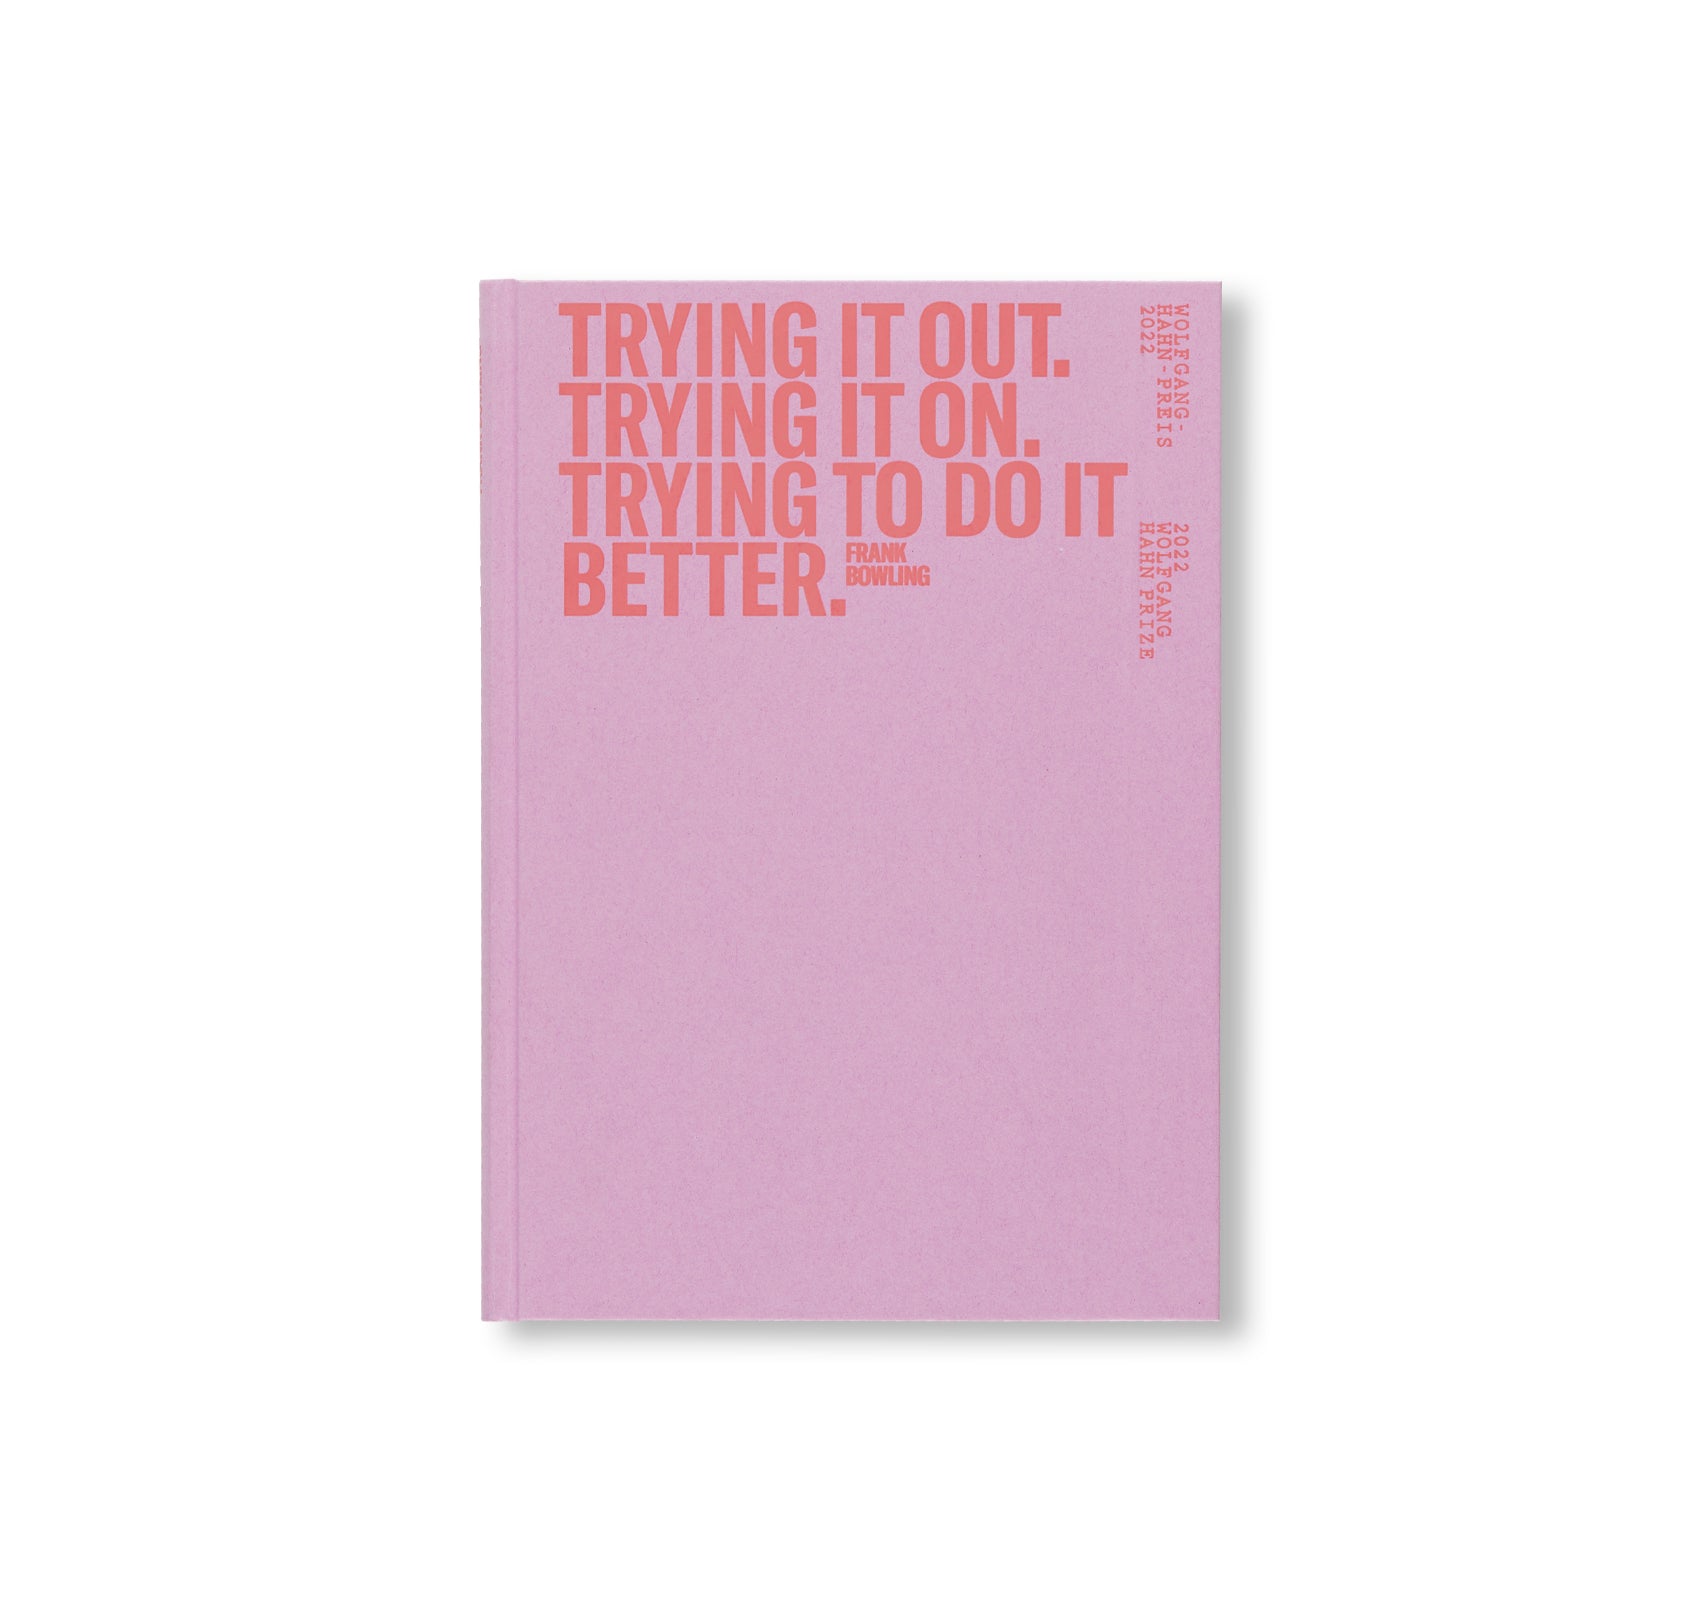 TRYING IT OUT. TRYING IT ON. TRYING TO DO IT BETTER. by Frank Bowling